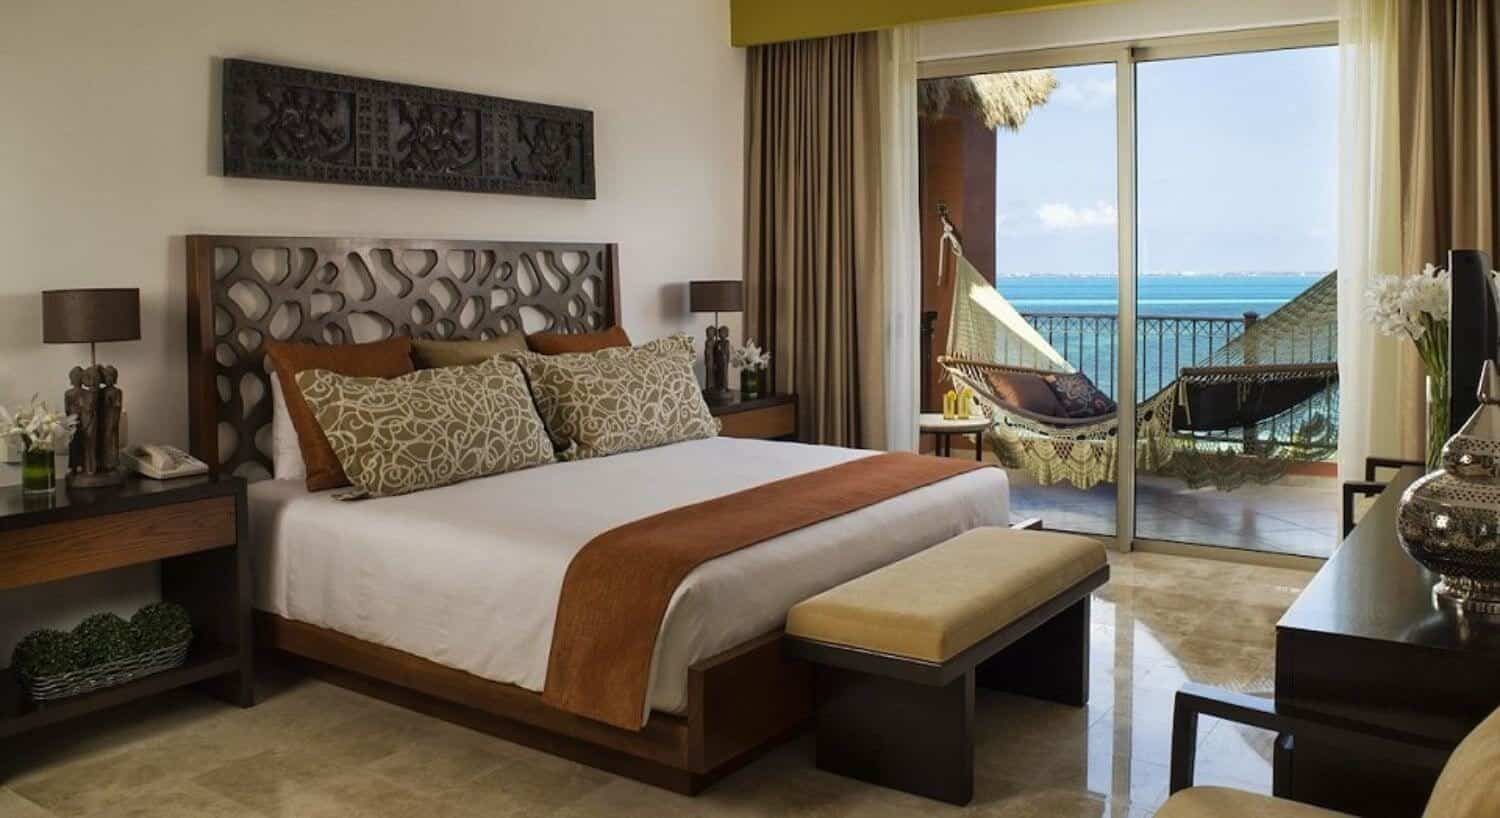 A bedroom with a King bed with white brown and green bedding, a plush sitting bench at the foot of the bed, nightstands and lamps on either side of the bed, a dresser with flat screen TV on the opposite was as the bed, and sliding doors leading out to a balcony with an oversized hammock, and beautiful turquoise ocean views.